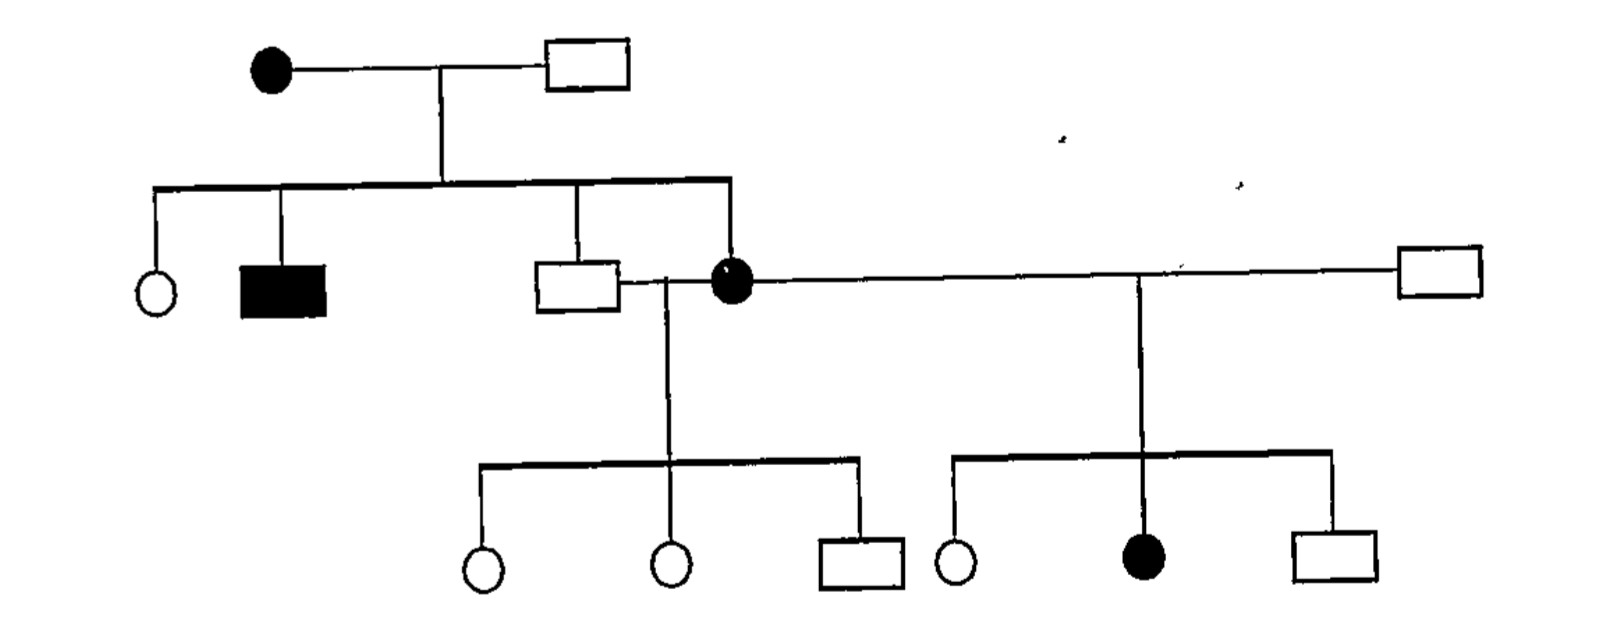 In the following pedigree chart, state if the trait is autosomal dominant, autosomal recessive or sex linked. Give a reason for your answer.